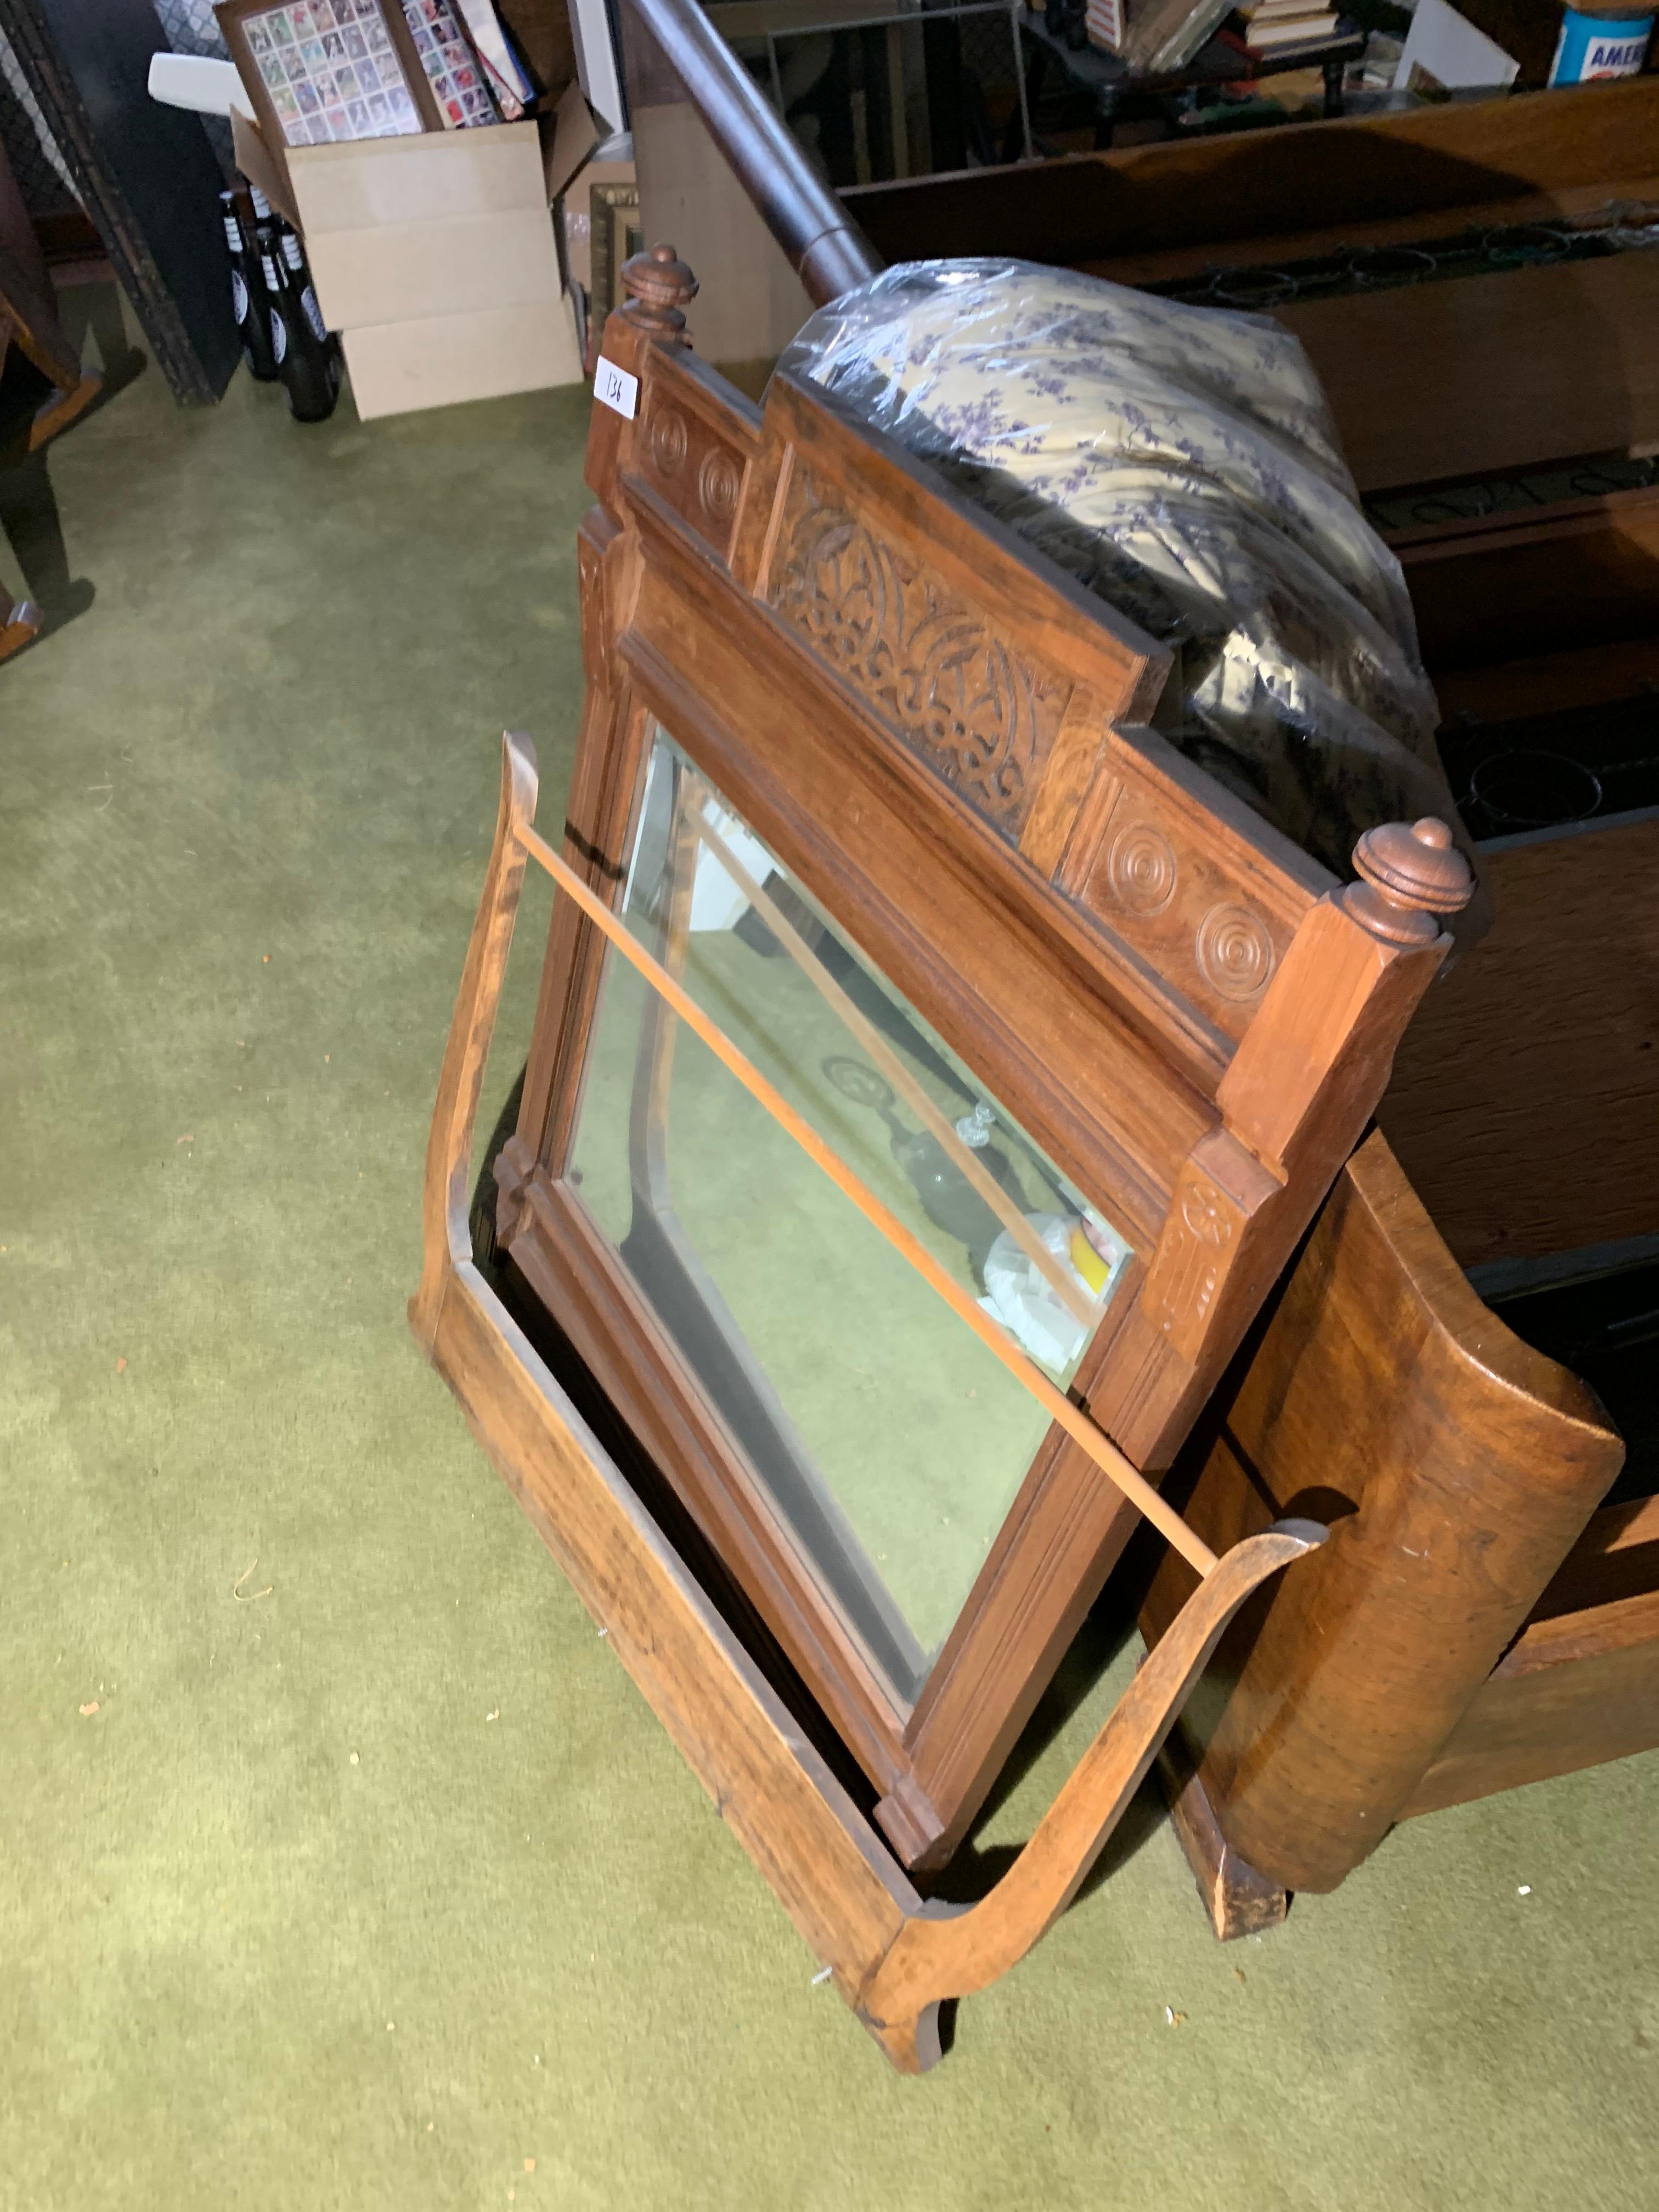 Antique mirror and towel bar